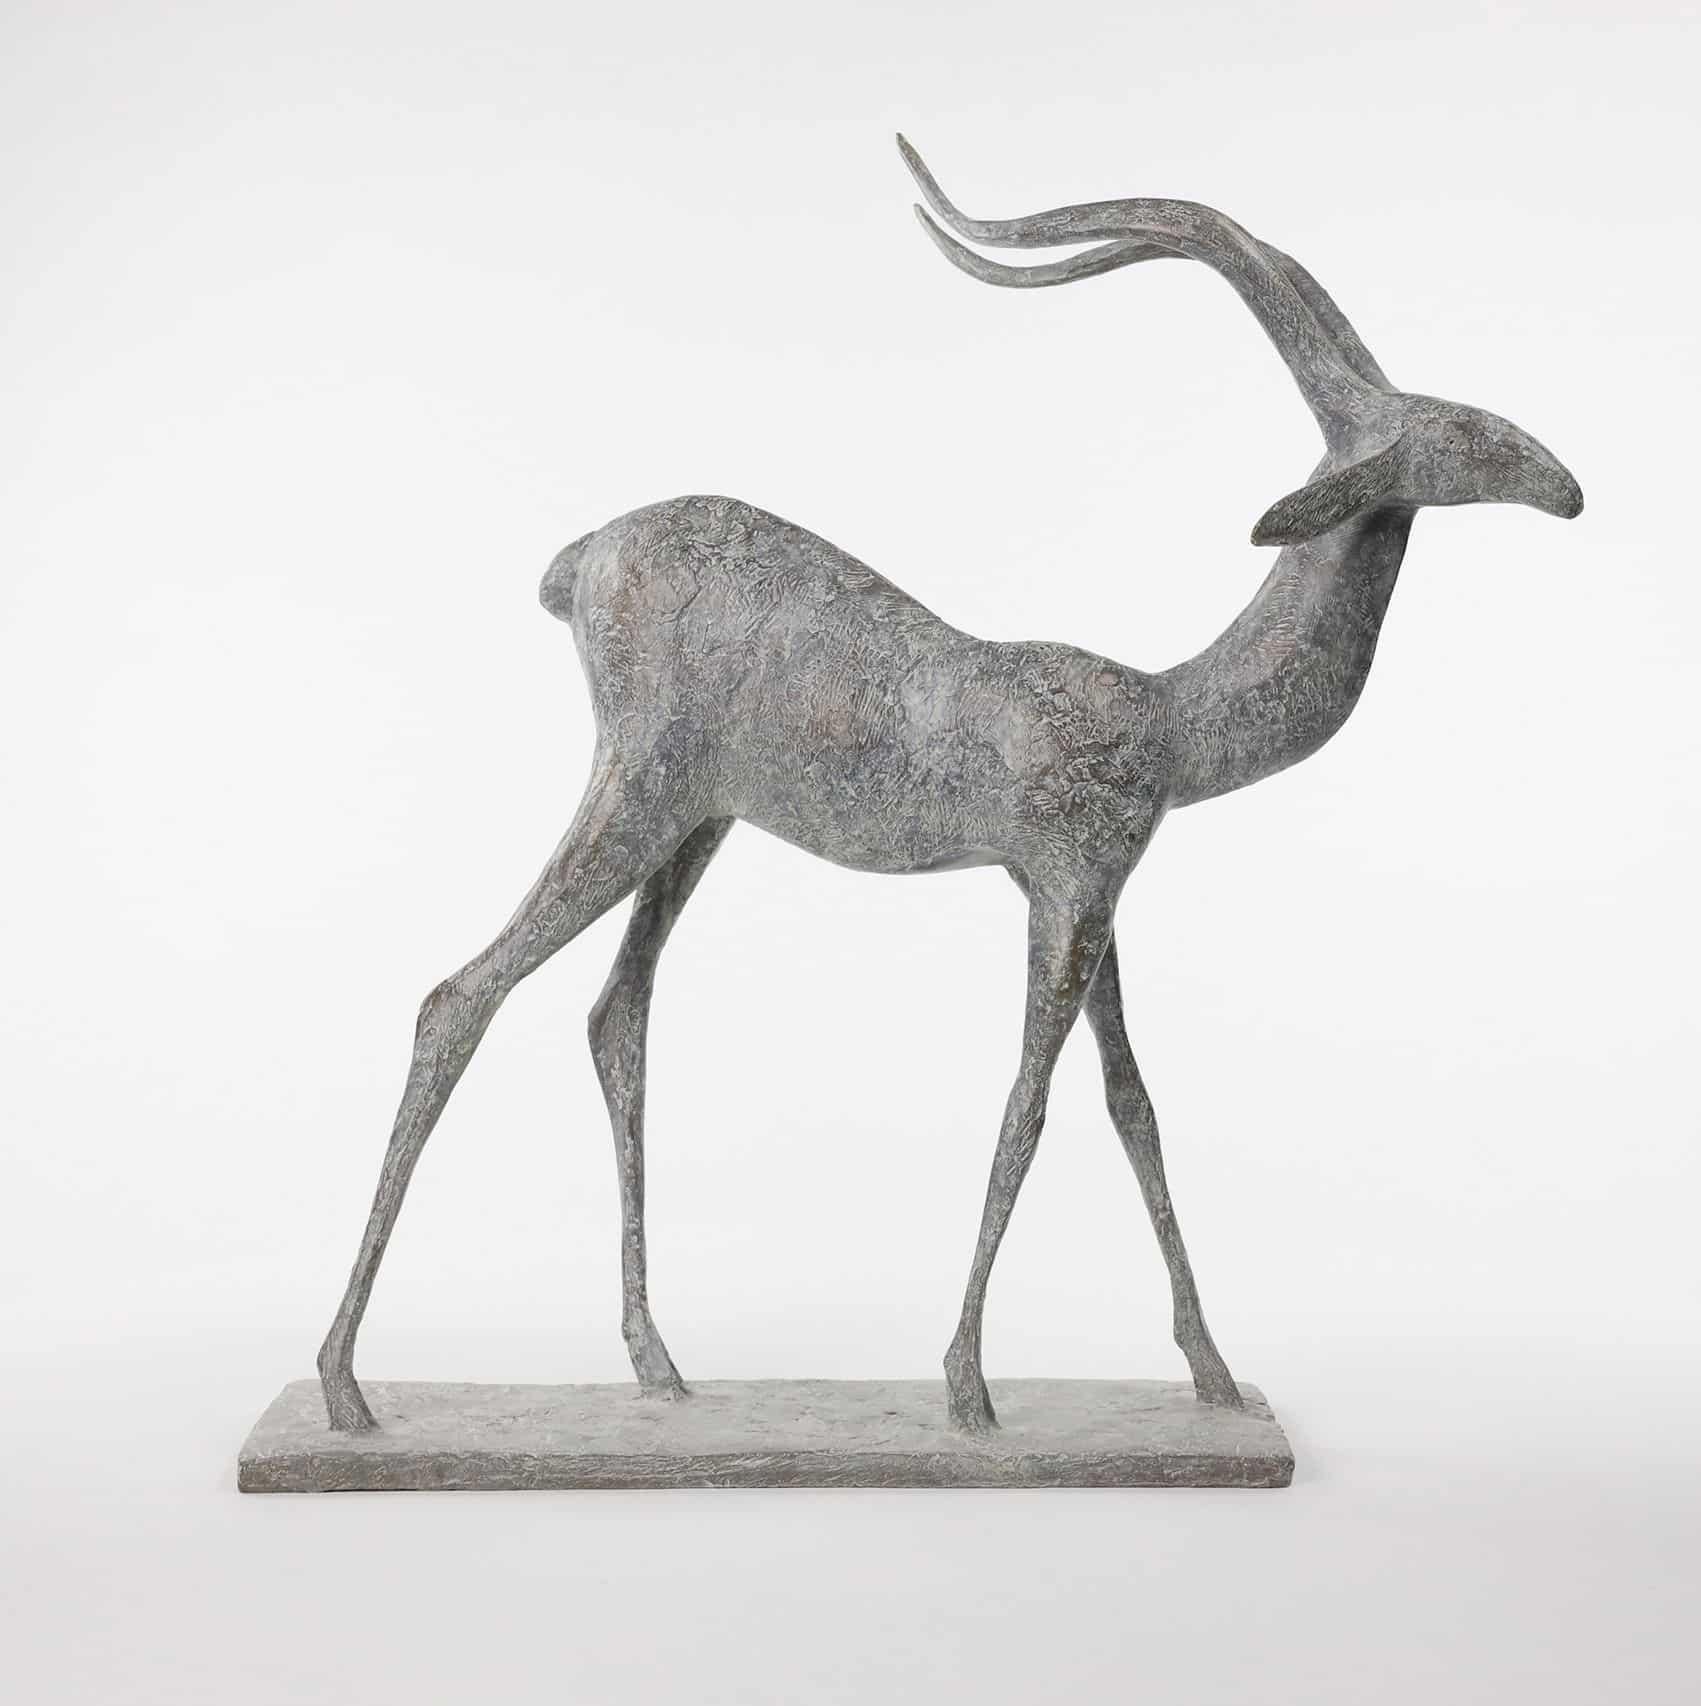 Gazelle VI is a bronze sculpture by French contemporary artist Pierre Yermia, dimensions are 55 × 52 × 21 cm (21.7 × 20.5 × 8.3 in). 
The sculpture is signed and numbered, it is part of a limited edition of 8 editions + 4 artist’s proofs, and comes